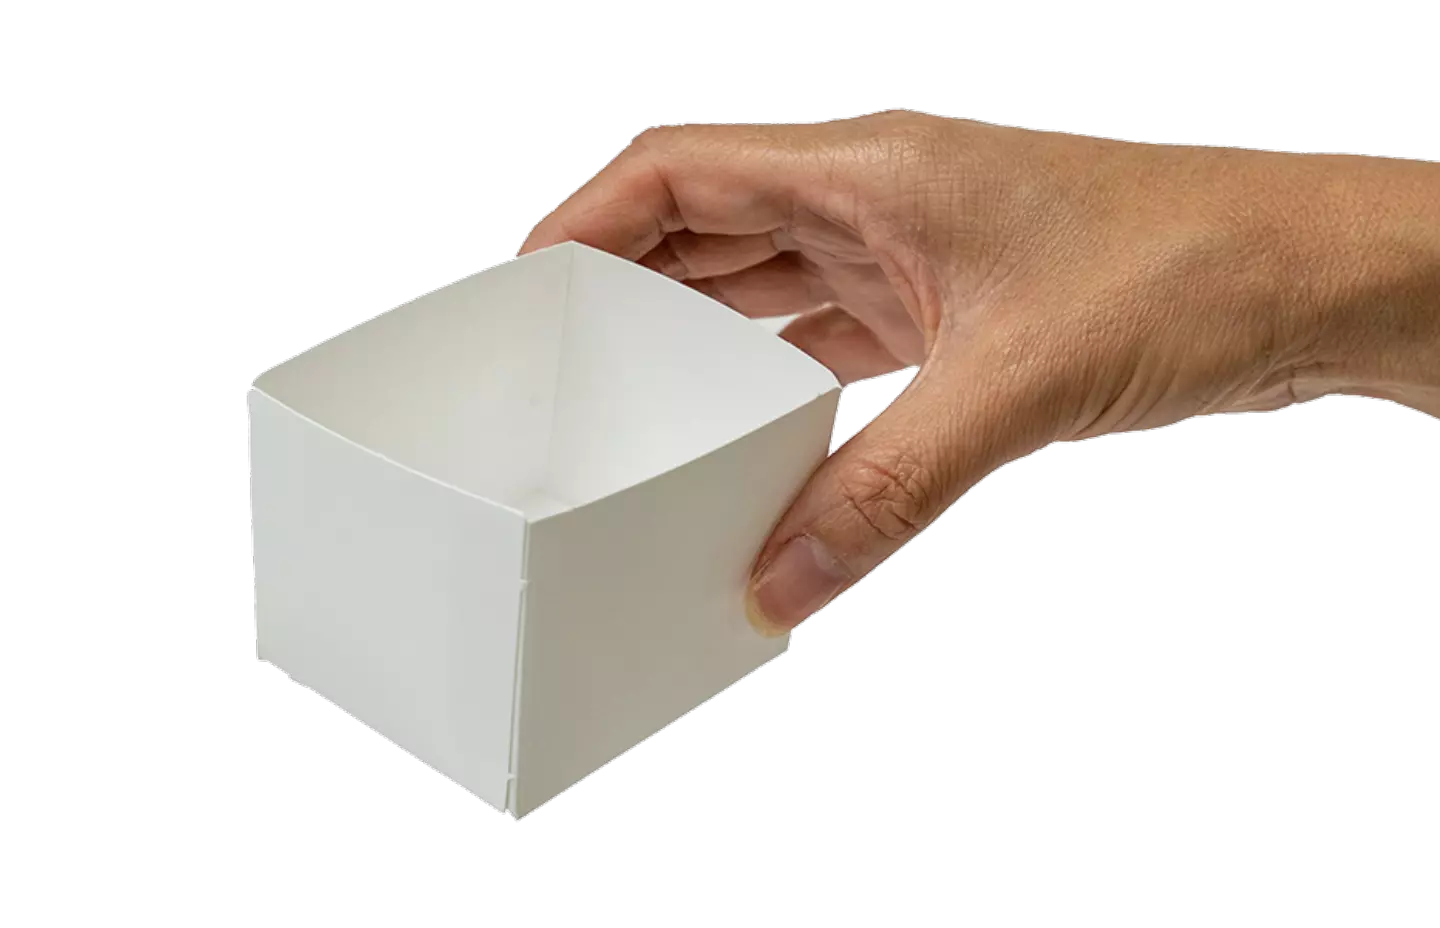 hand holding a small box